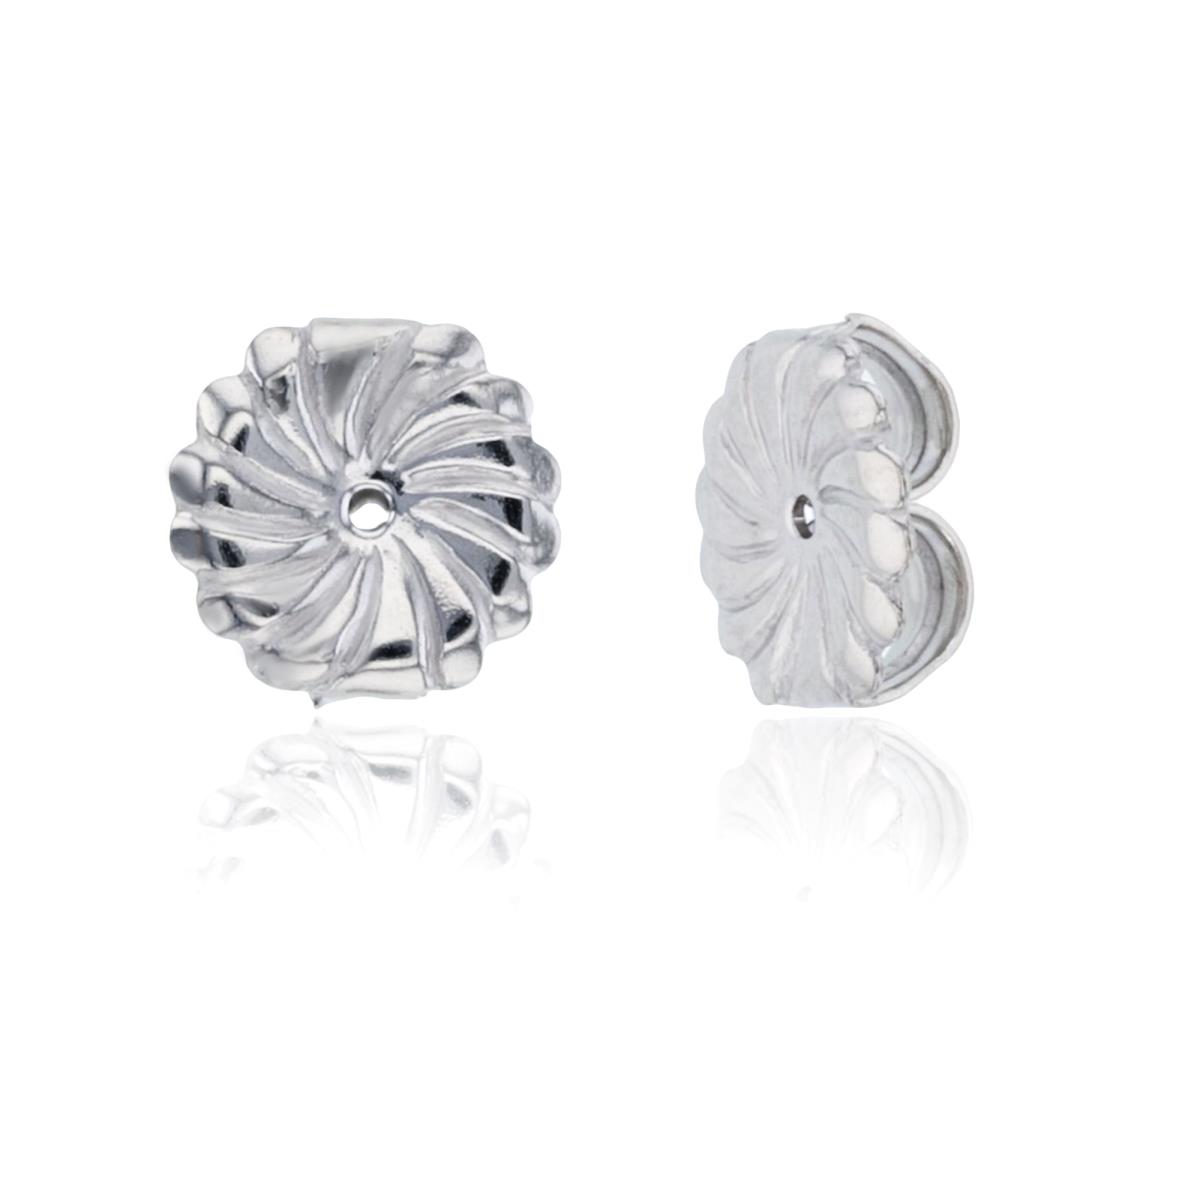 Sterling Silver Rhodium 9mm Twist Textured Earring Back Finding (1pc)